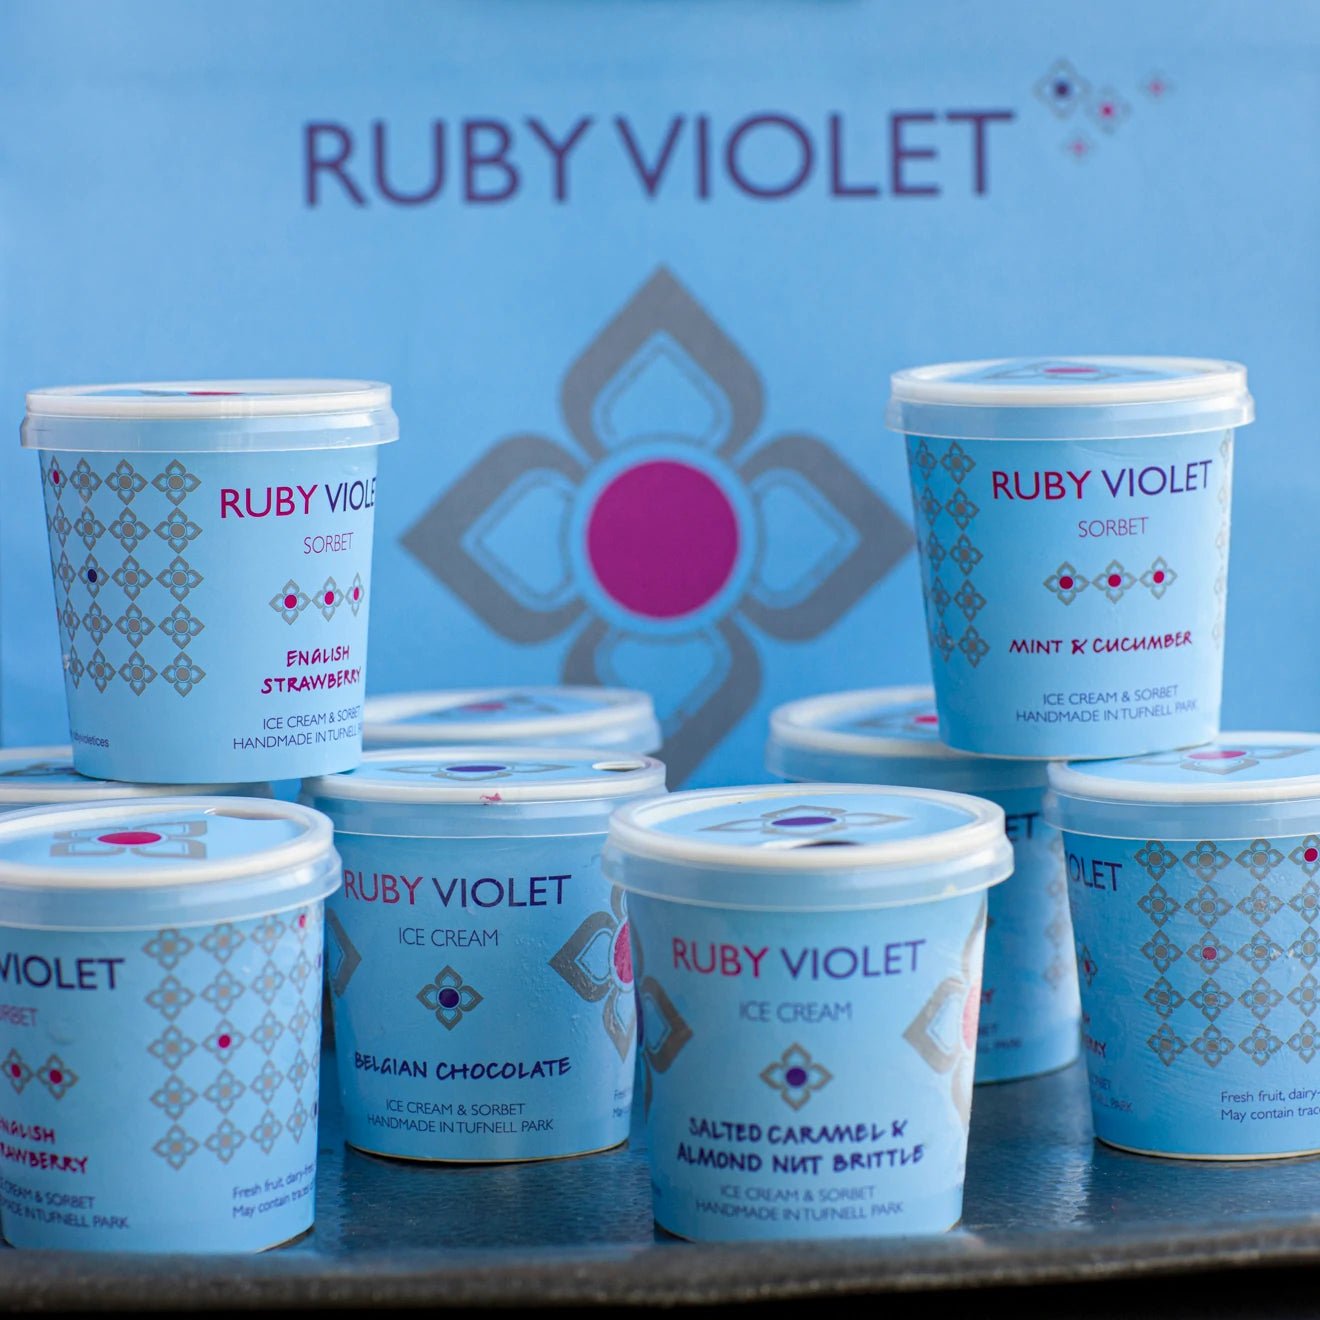 TINY TUBS SELECTION OFFER - Ruby Violet Ice Cream & Sorbet